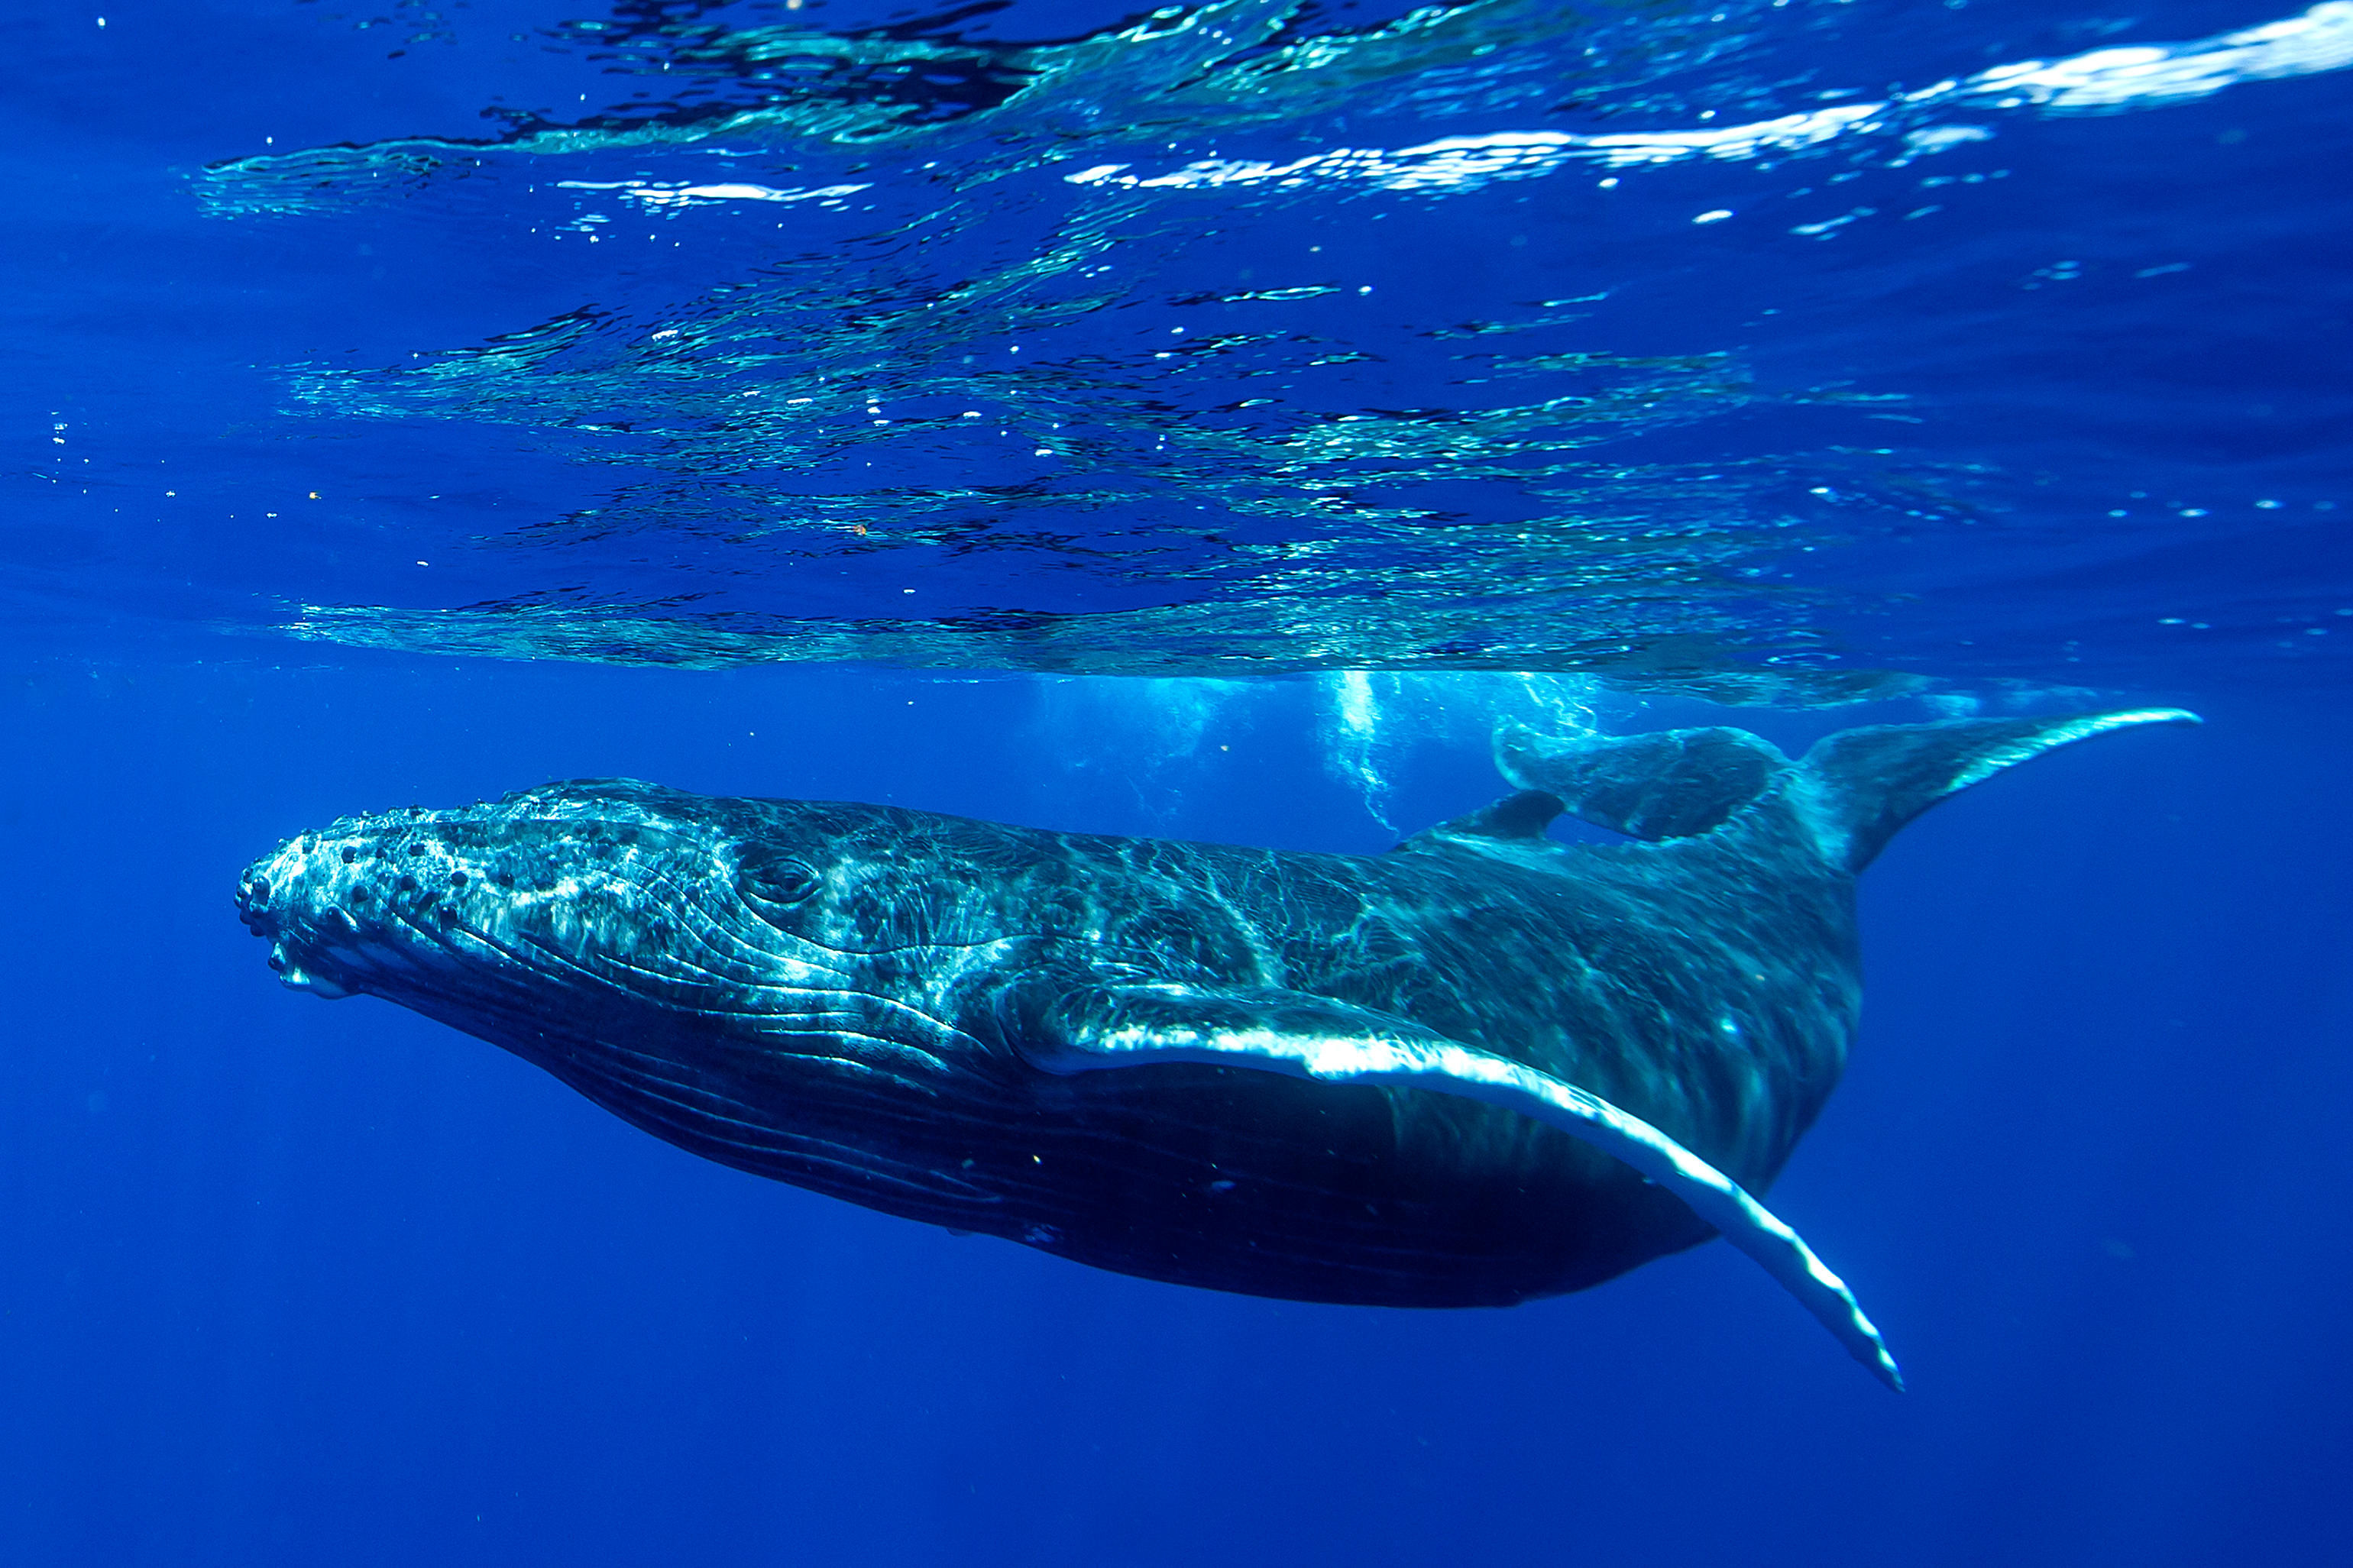 Underwater shot of a humpback whale